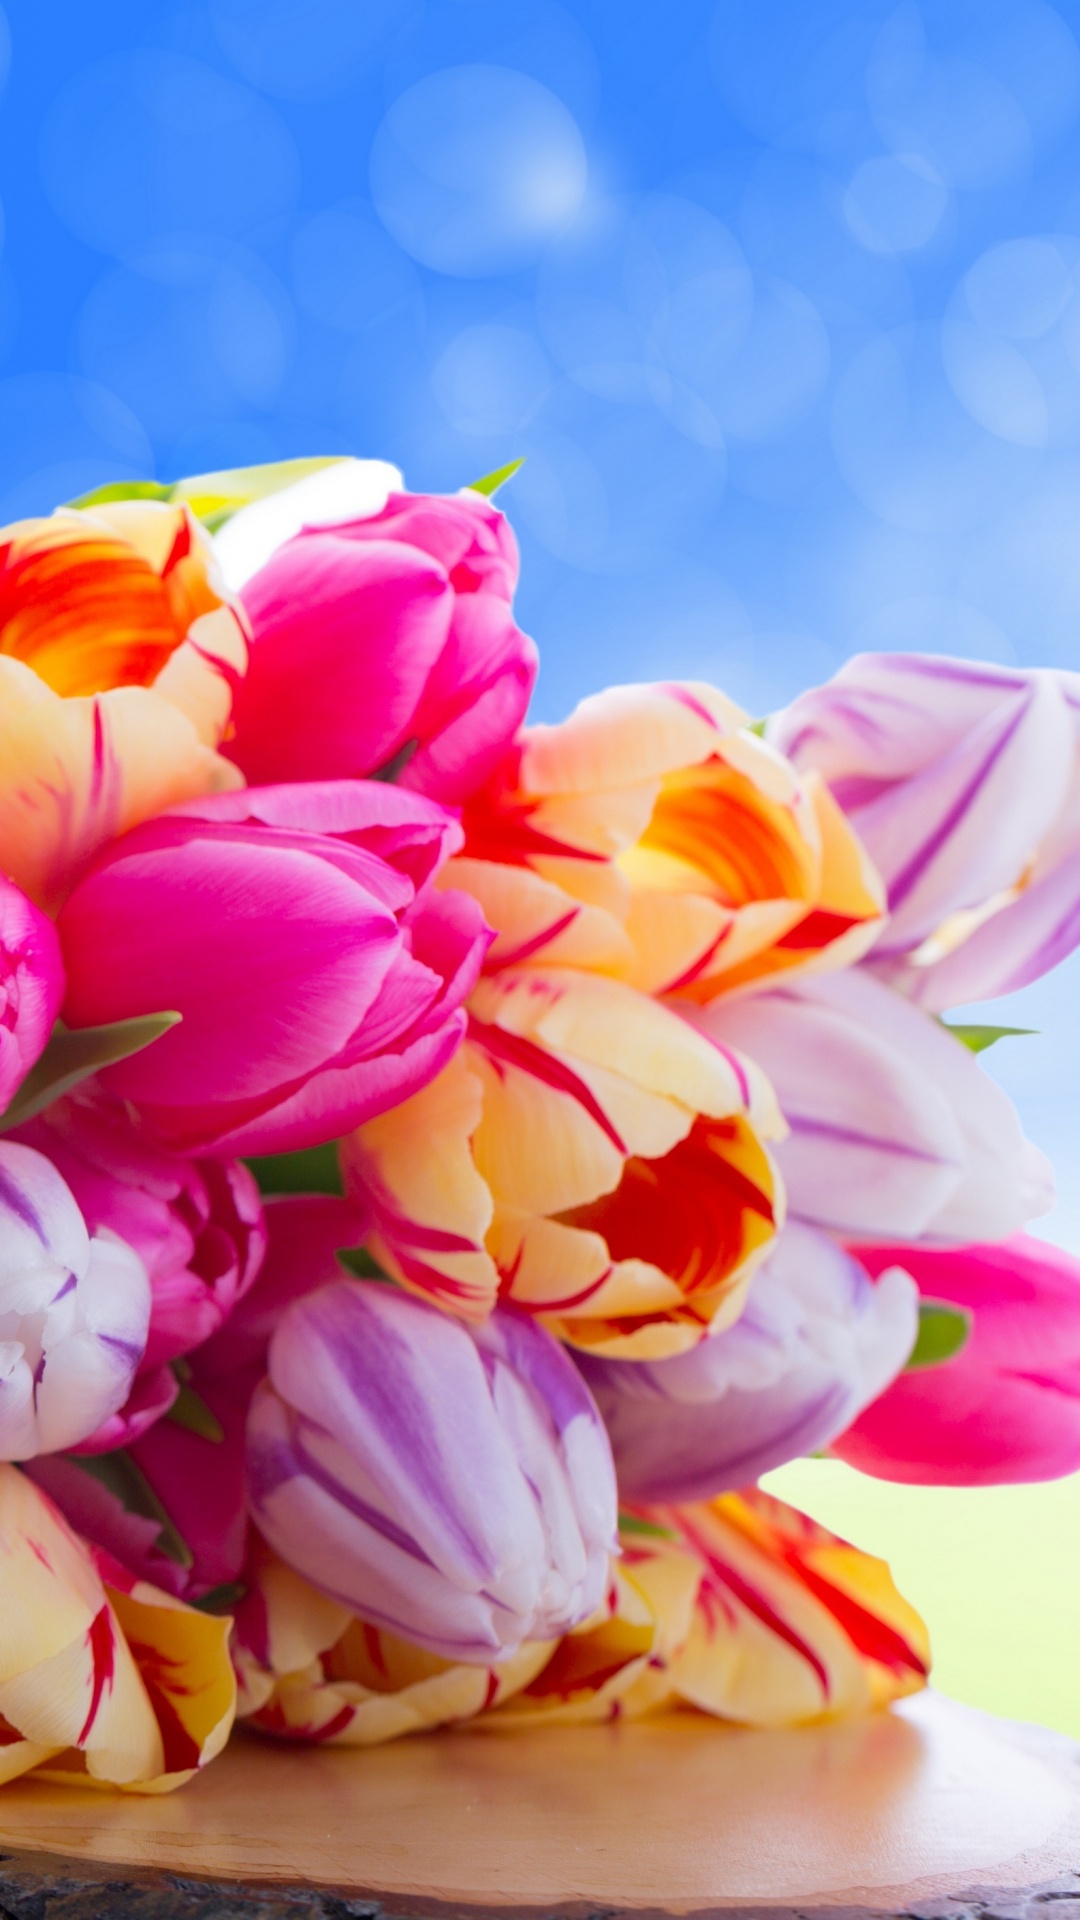 Pink and Yellow Tulips Bouquet. Wallpaper in 1080x1920 Resolution